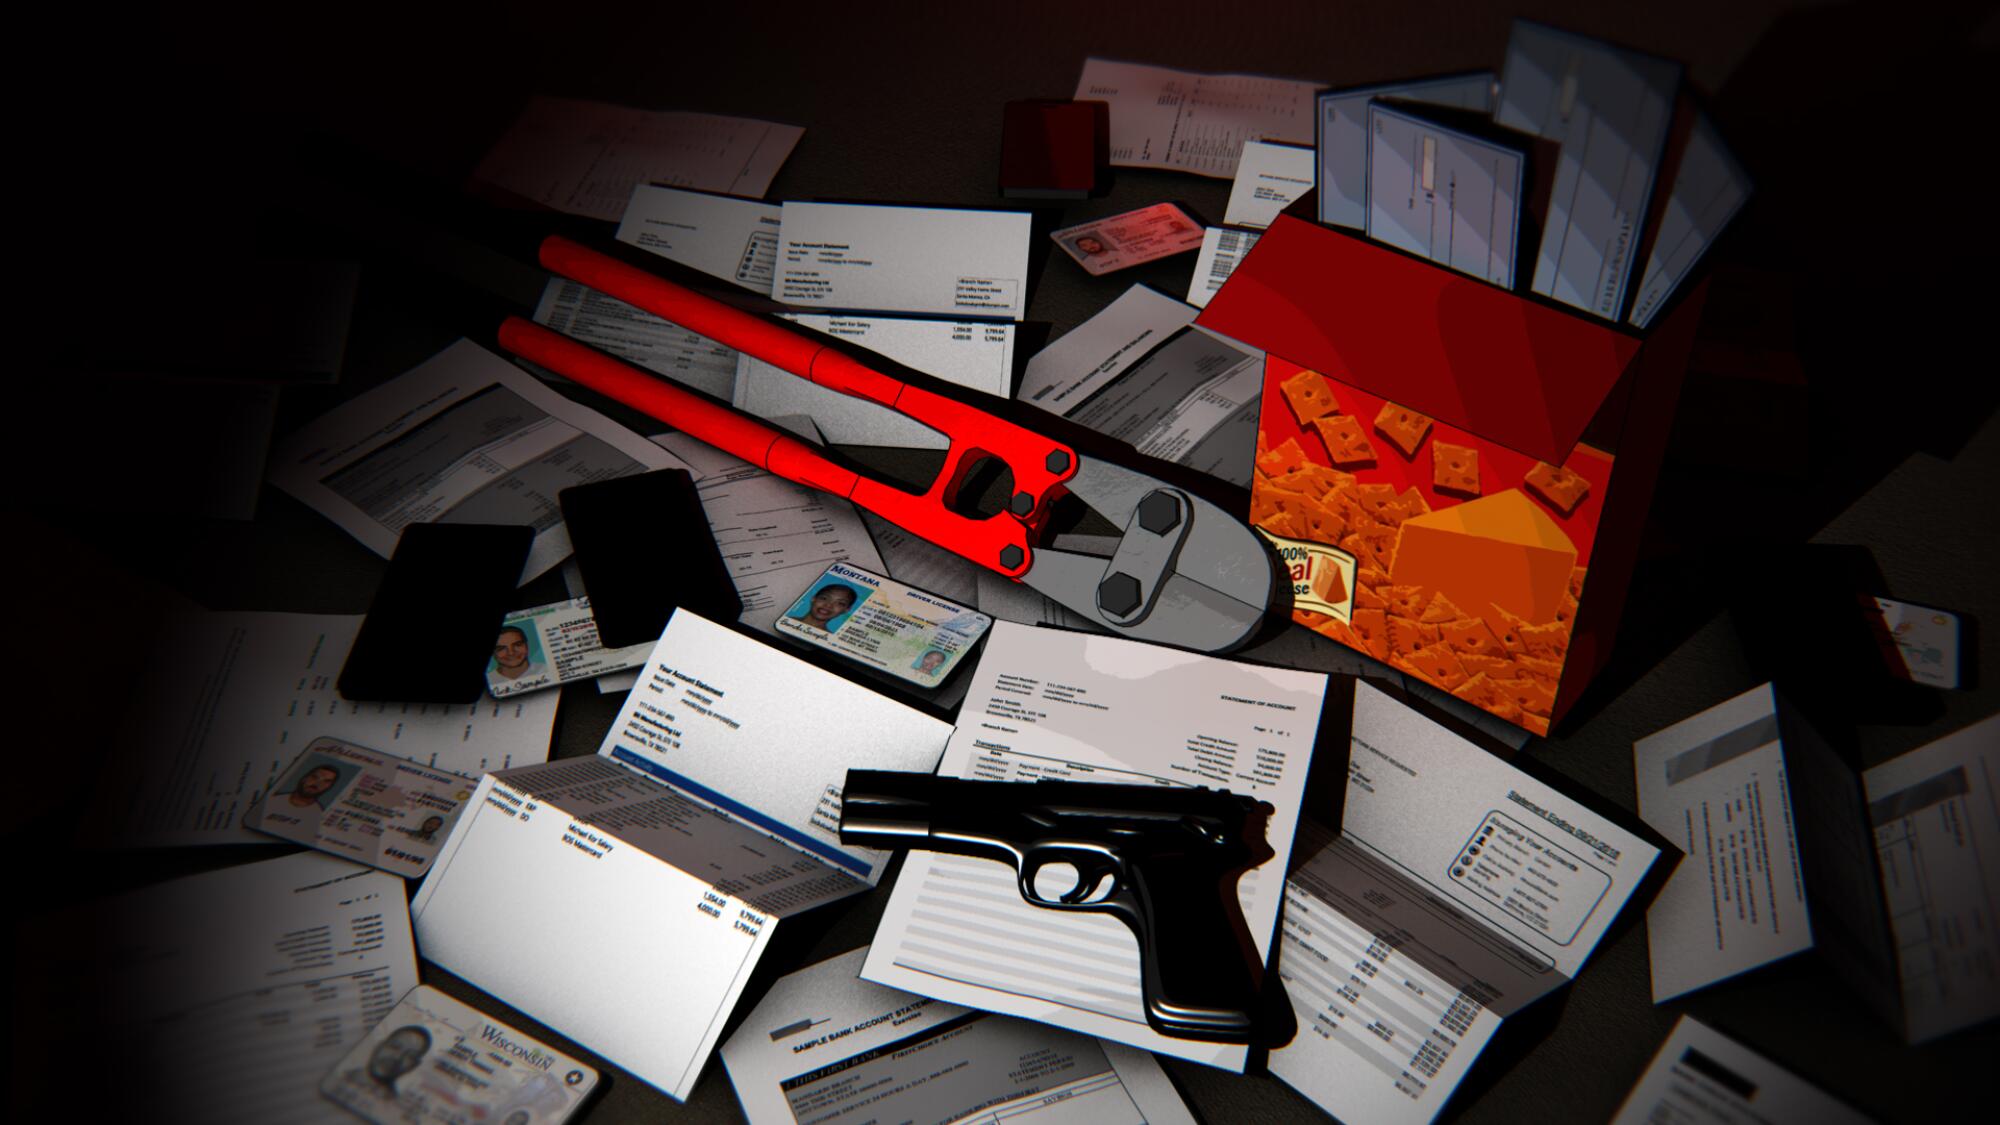 Illustration shows invoices, IDs, a gun ... and checkbooks stuffed in a Cheez-Its box.